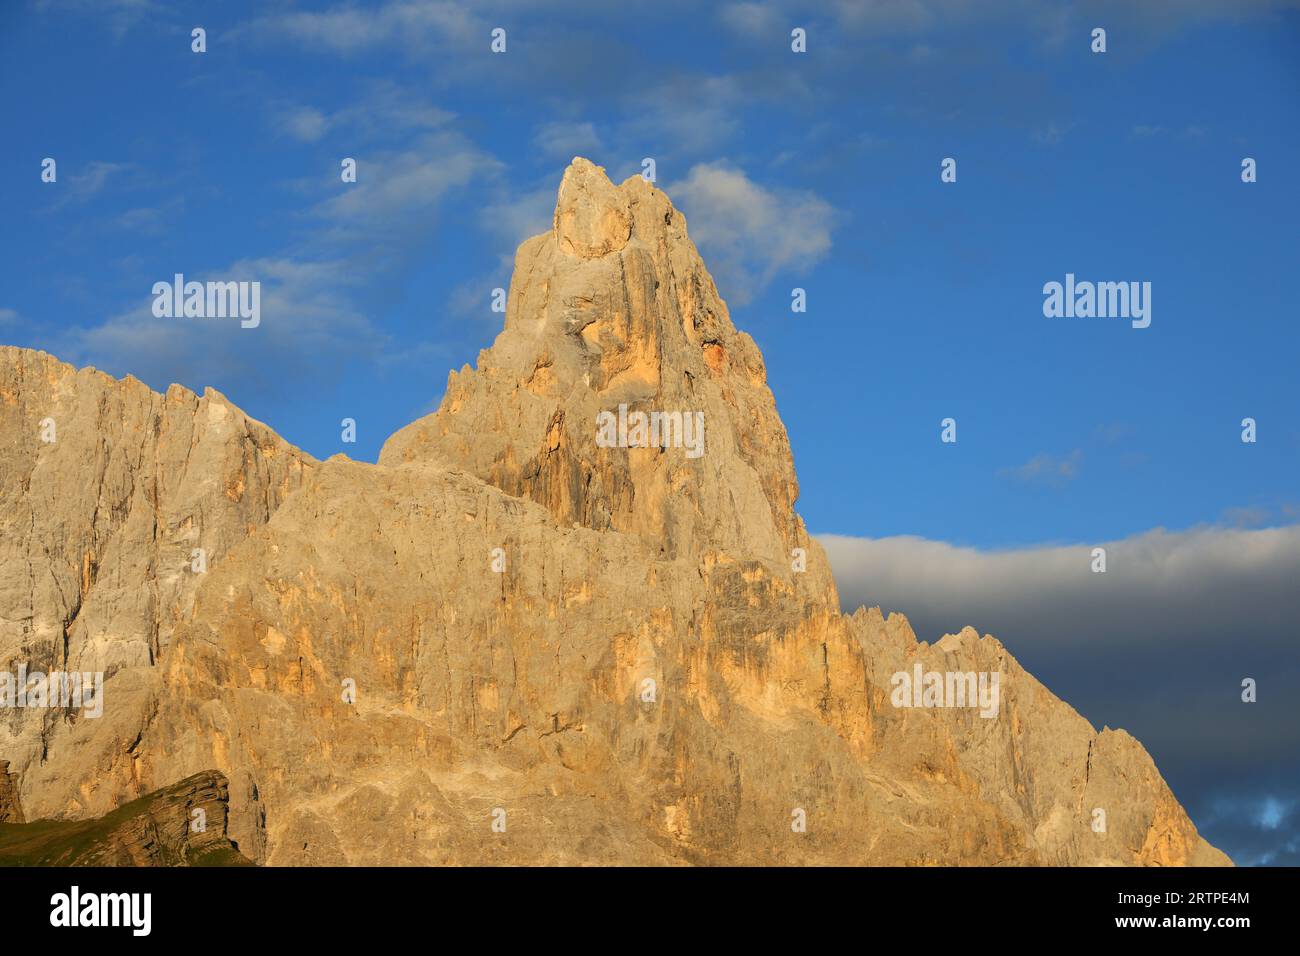 High mountain called CIMON DELLA PALA at sunset in Northern Italy Stock Photo